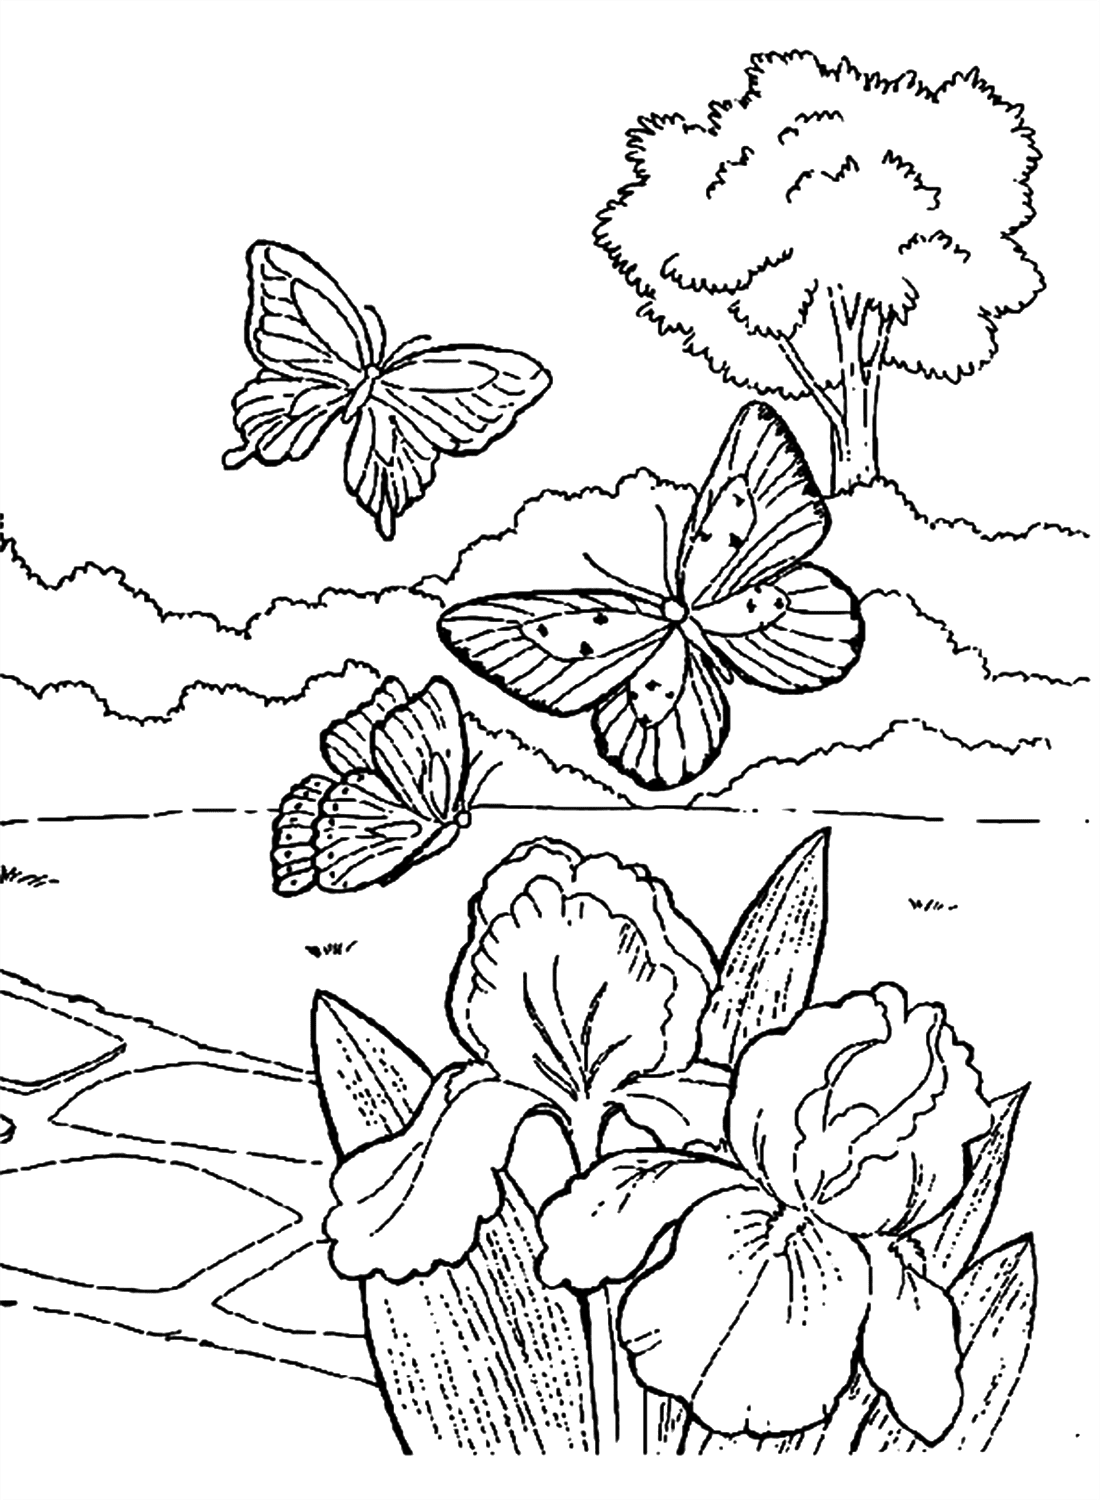 Butterflies Flying in Spring Coloring Page